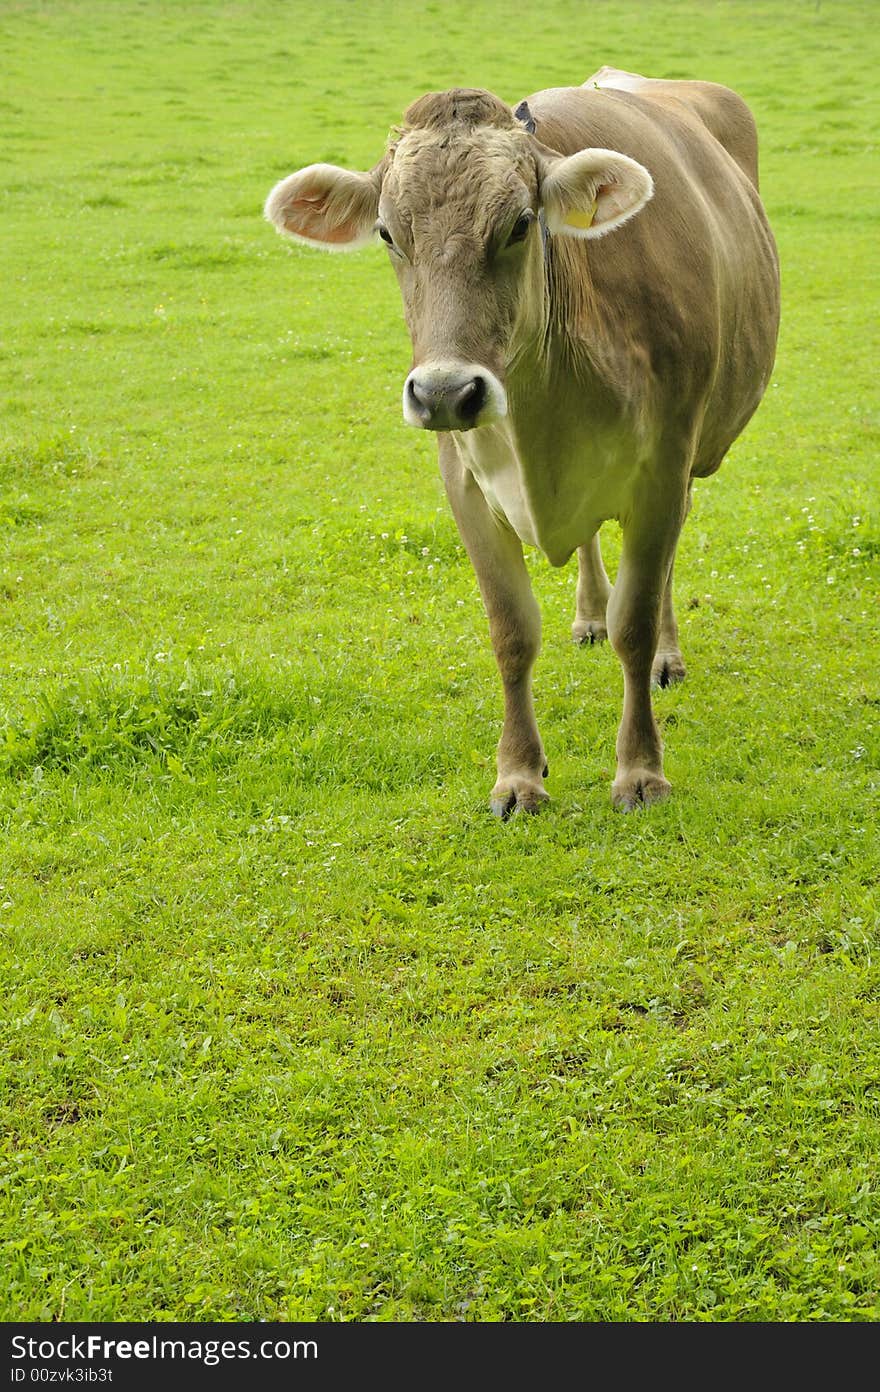 A jersey cow in a pasture at dawn. Space for copy bottom left. A jersey cow in a pasture at dawn. Space for copy bottom left.